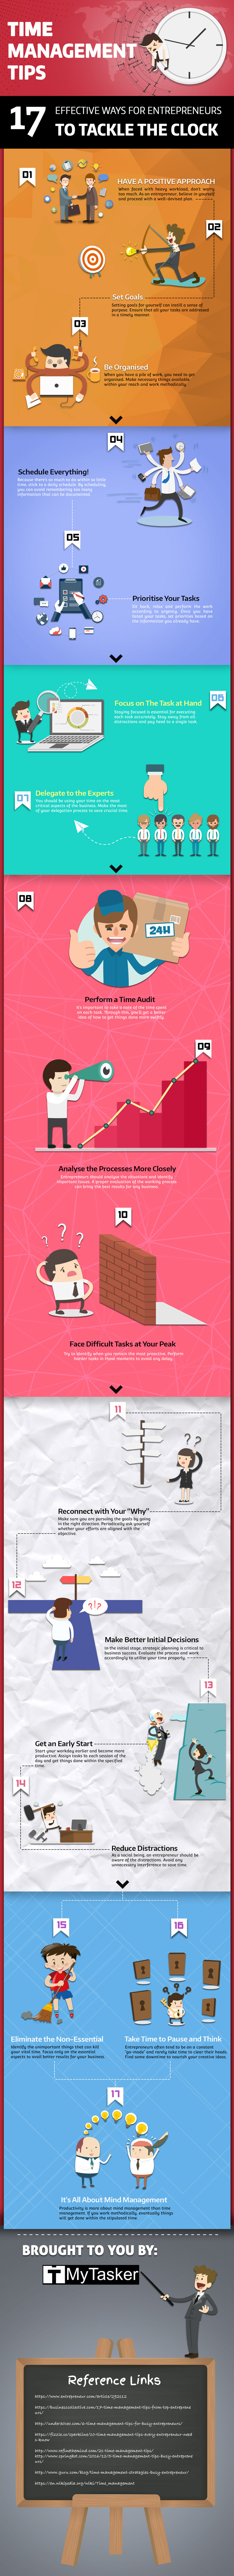 Long infographic with 17 time management tips for entrepreneurs, including prioritization and delegation, presented in a colorful and engaging format.